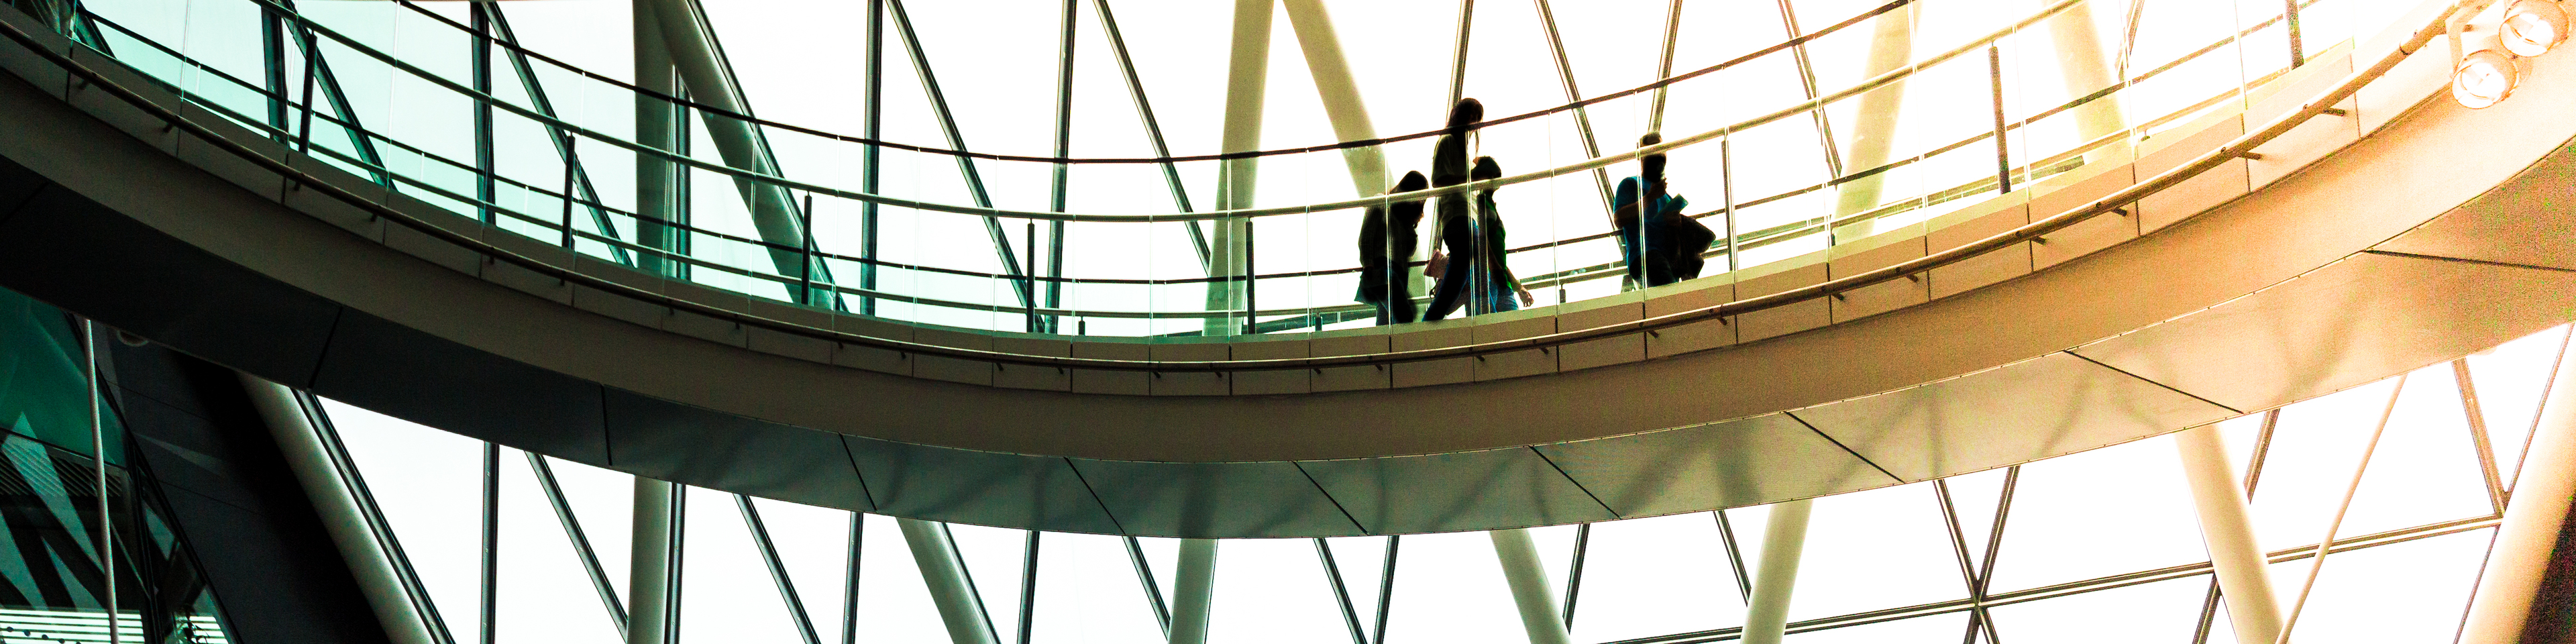 Abstract modern architecture and silhouettes of people on spiral staircase